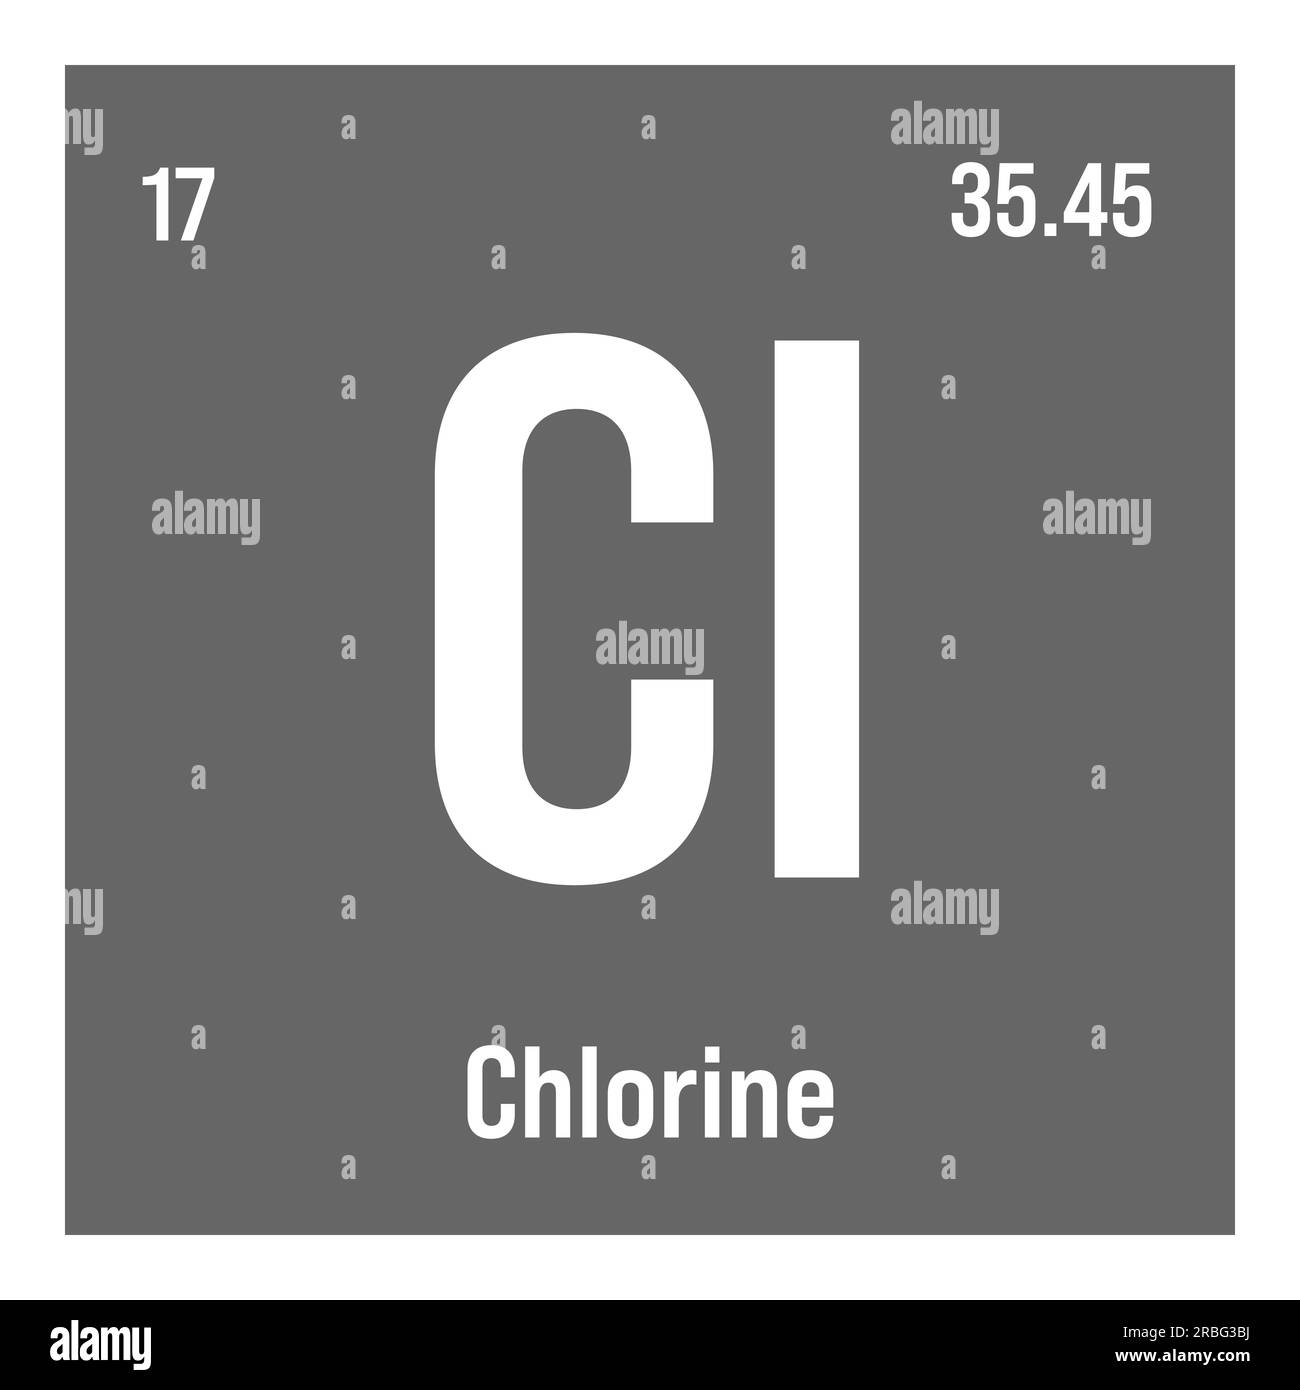 Holmium, Ho, periodic table element with name, symbol, atomic number and weight. Rare earth metal with various industrial uses, such as in lasers, magnets, and as a neutron absorber in nuclear reactors. Stock Vector